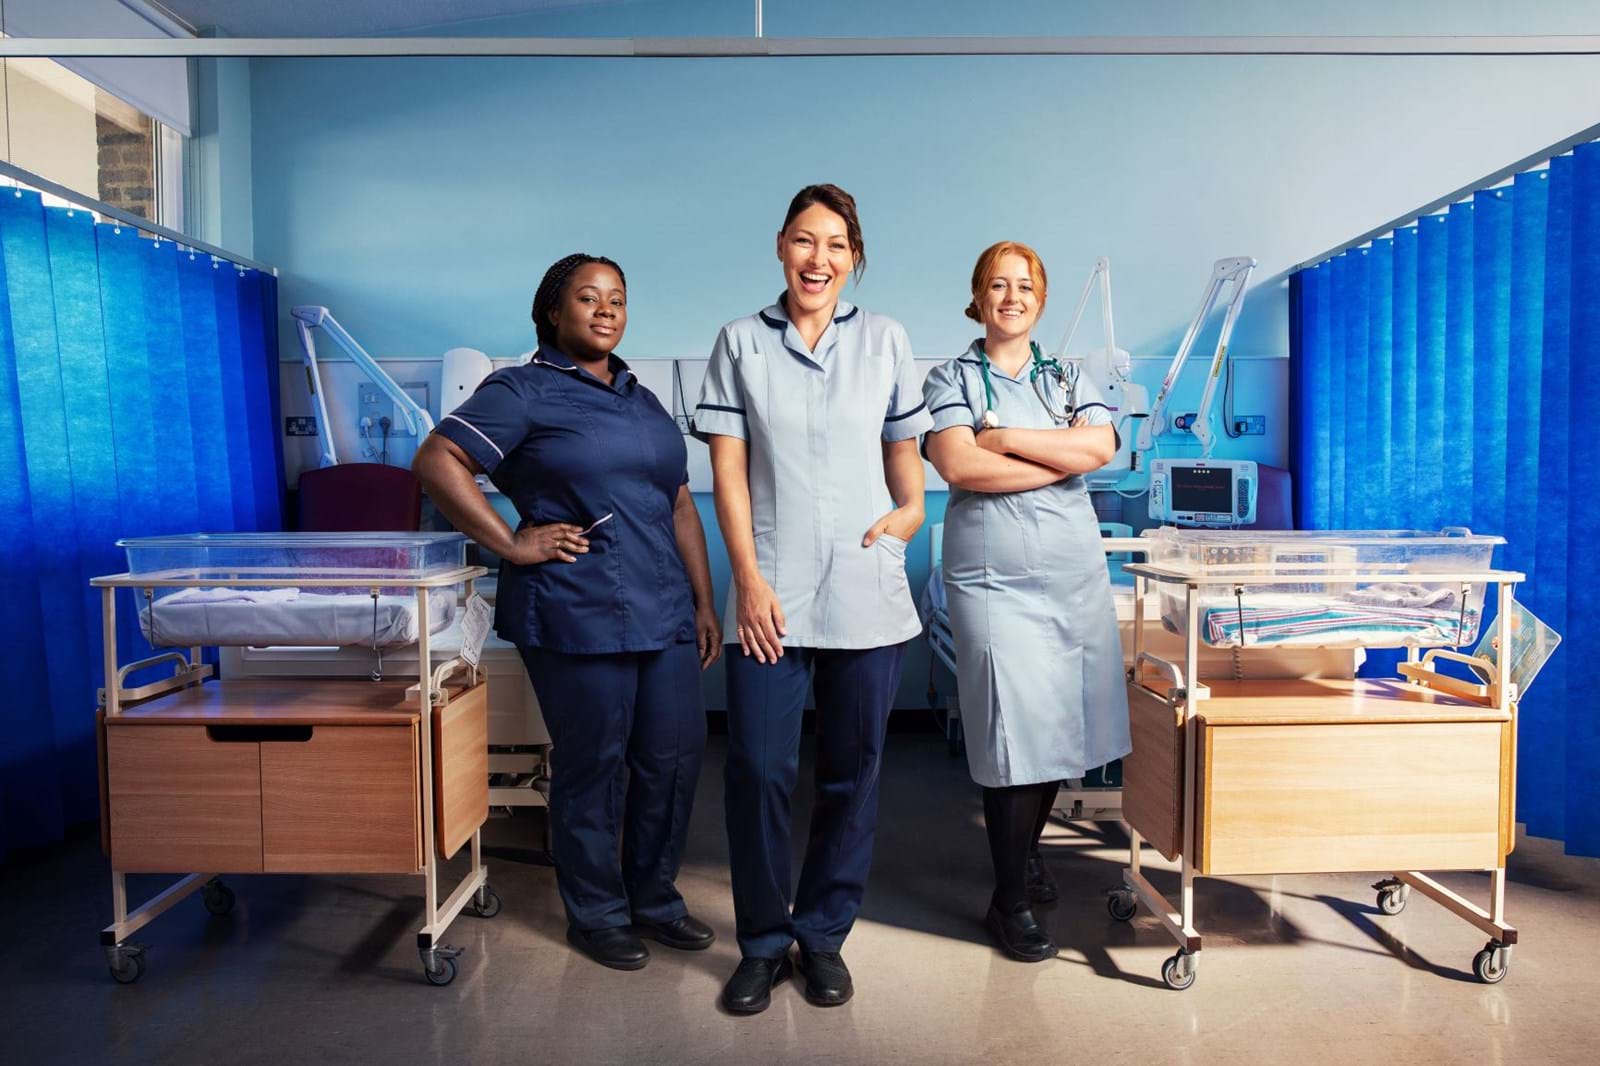 Emma Willis heads to Watford General Hospital in fourth series of Firecracker's Emma Willis: Delivering Babies 